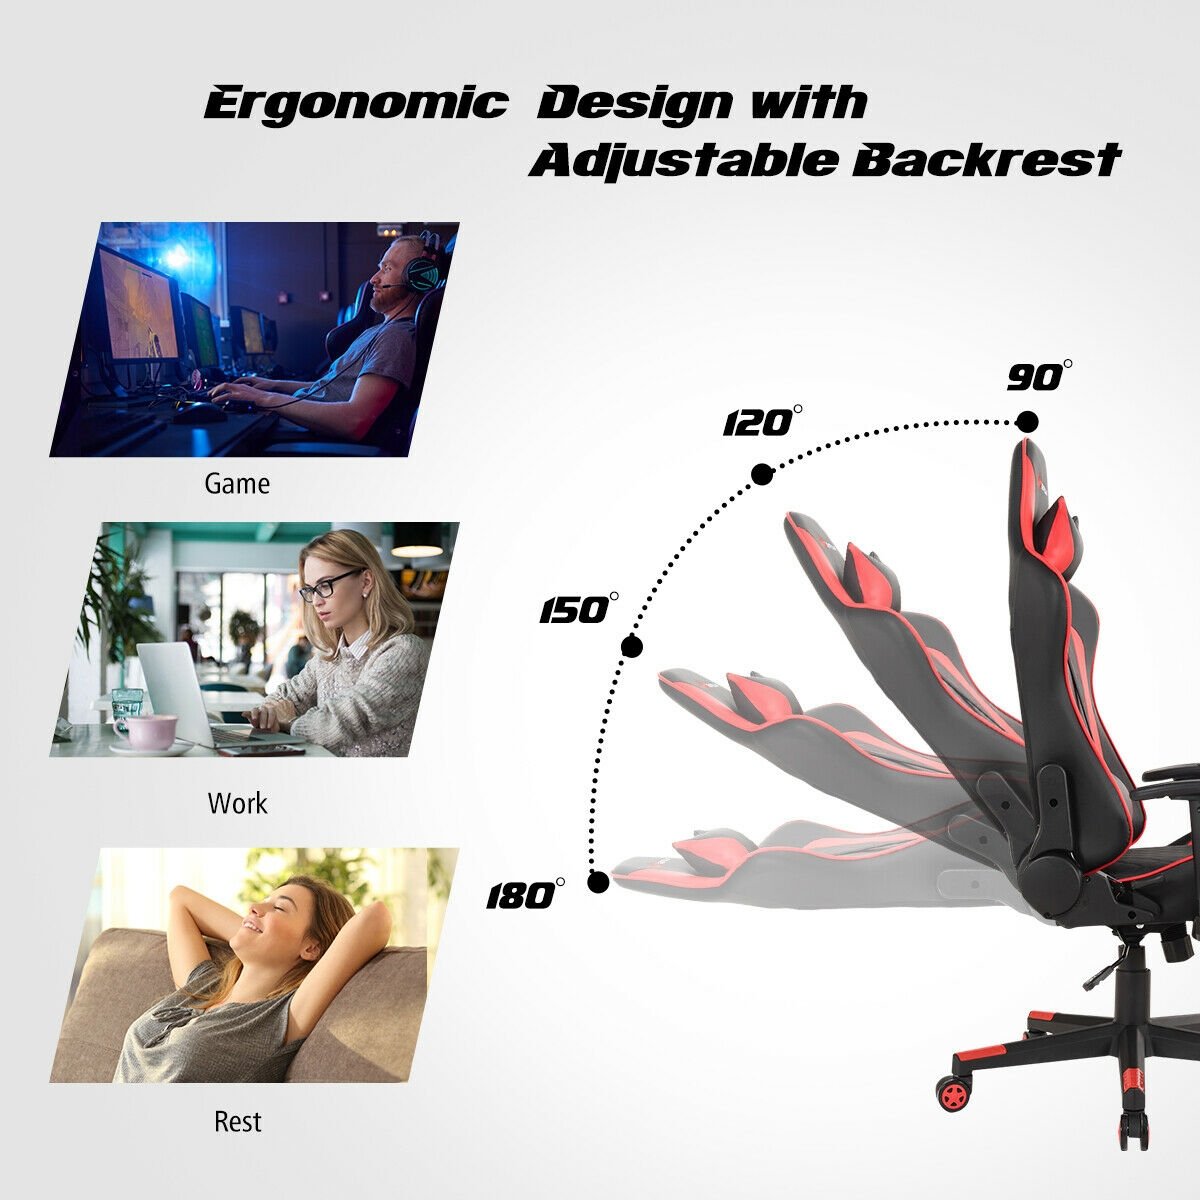 Massage Gaming Chair with Lumbar Support and Headrest, Red - Gallery Canada